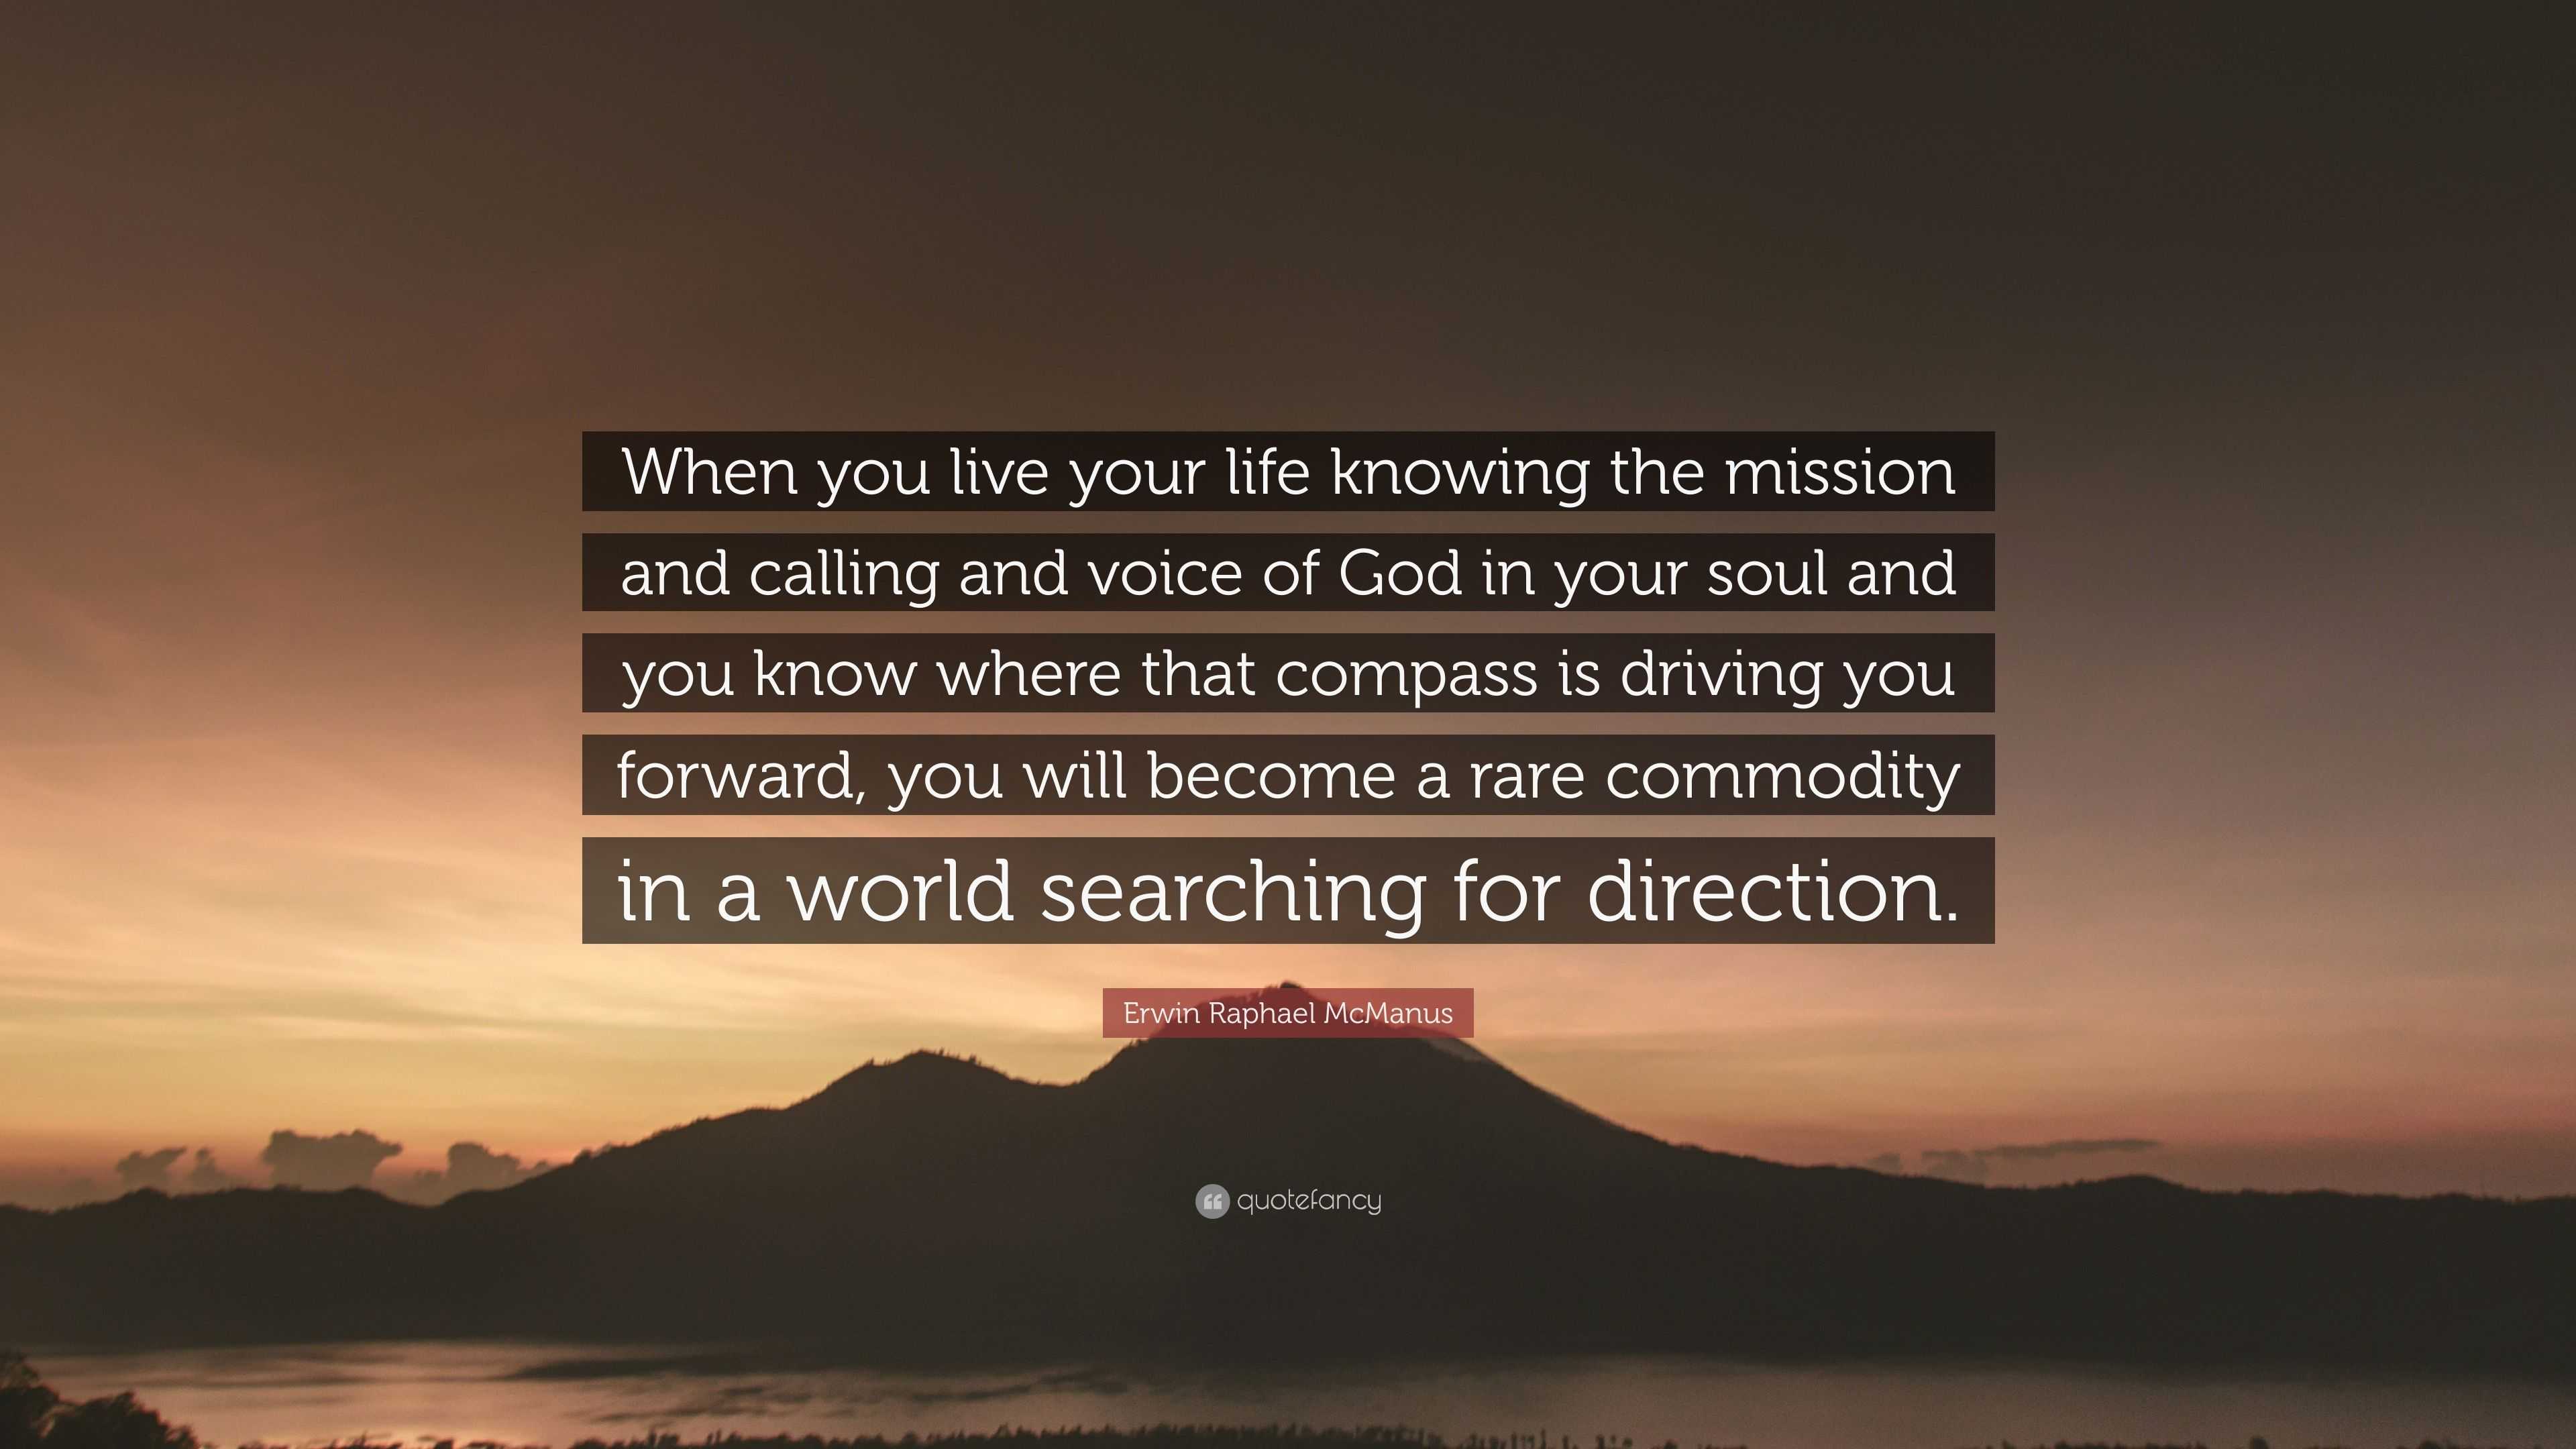 Erwin Raphael McManus Quote “When you live your life knowing the mission and calling